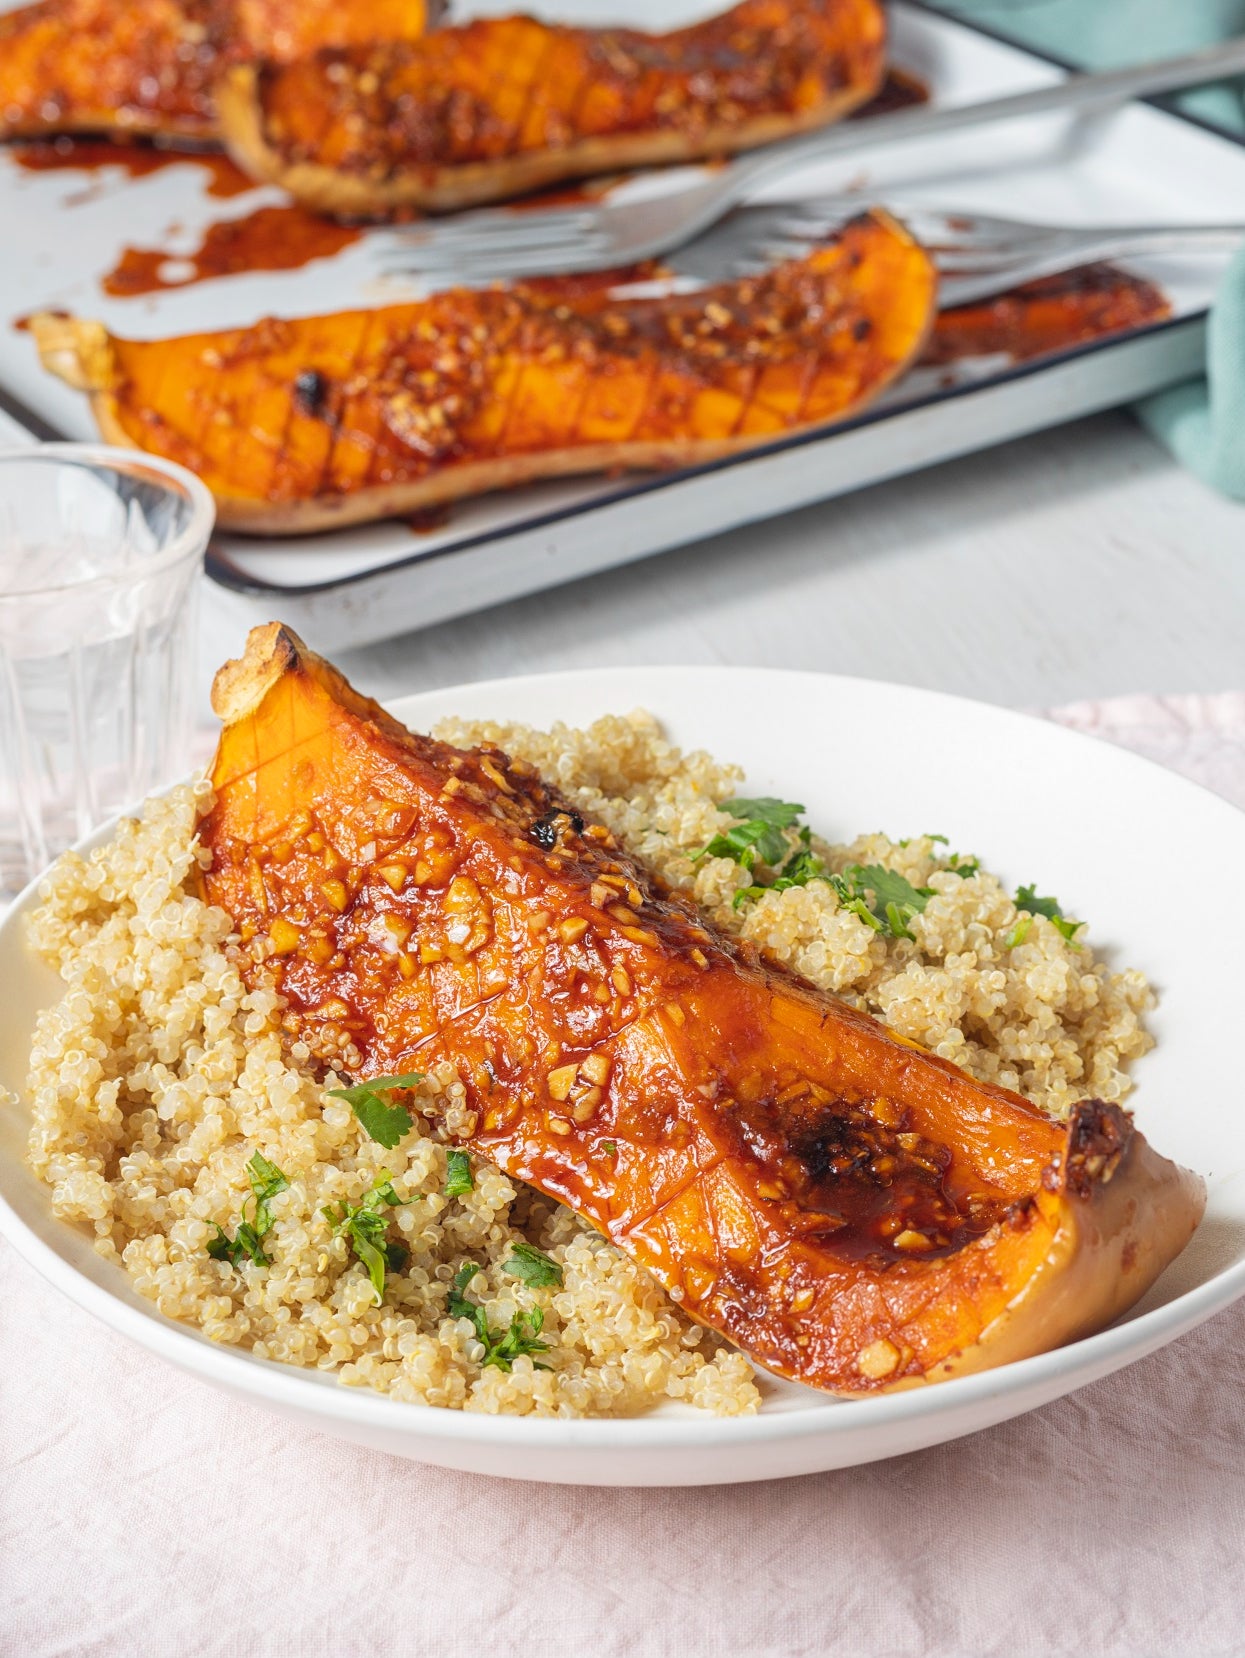 This butternut squash and quinoa dish makes for a perfect healthy dinner